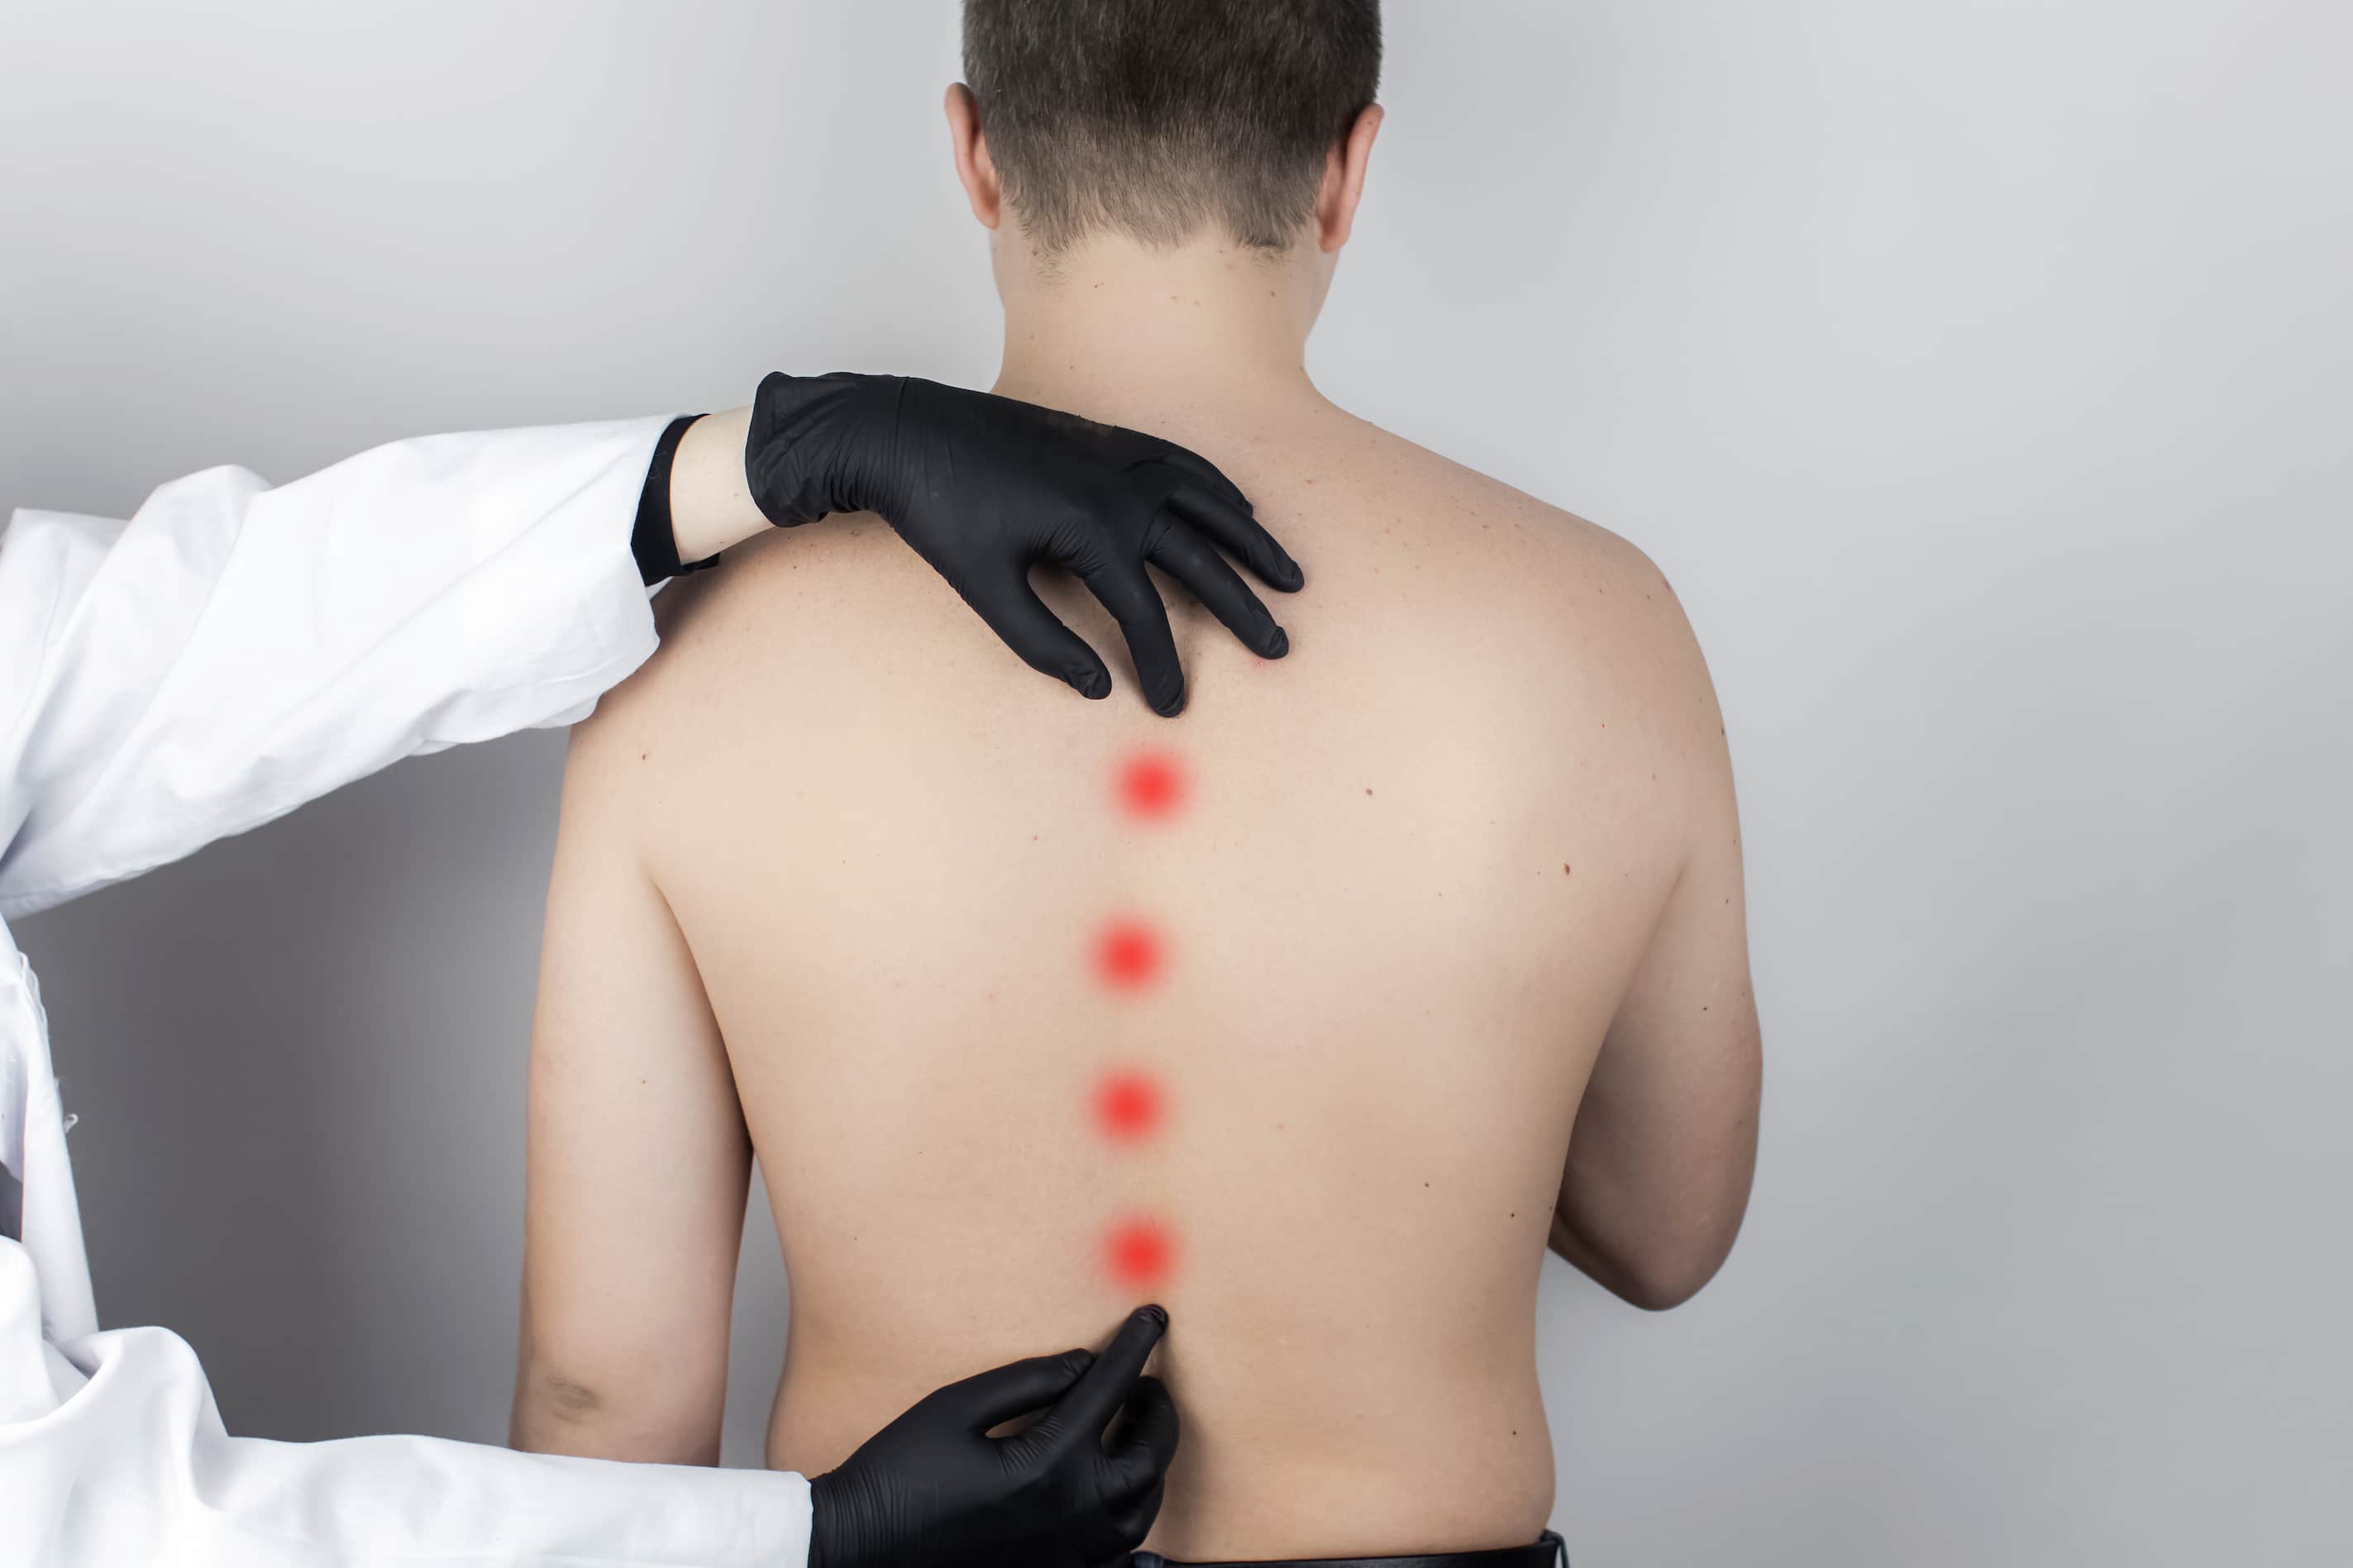 Scoliosis Surgery Success Rate in Turkey